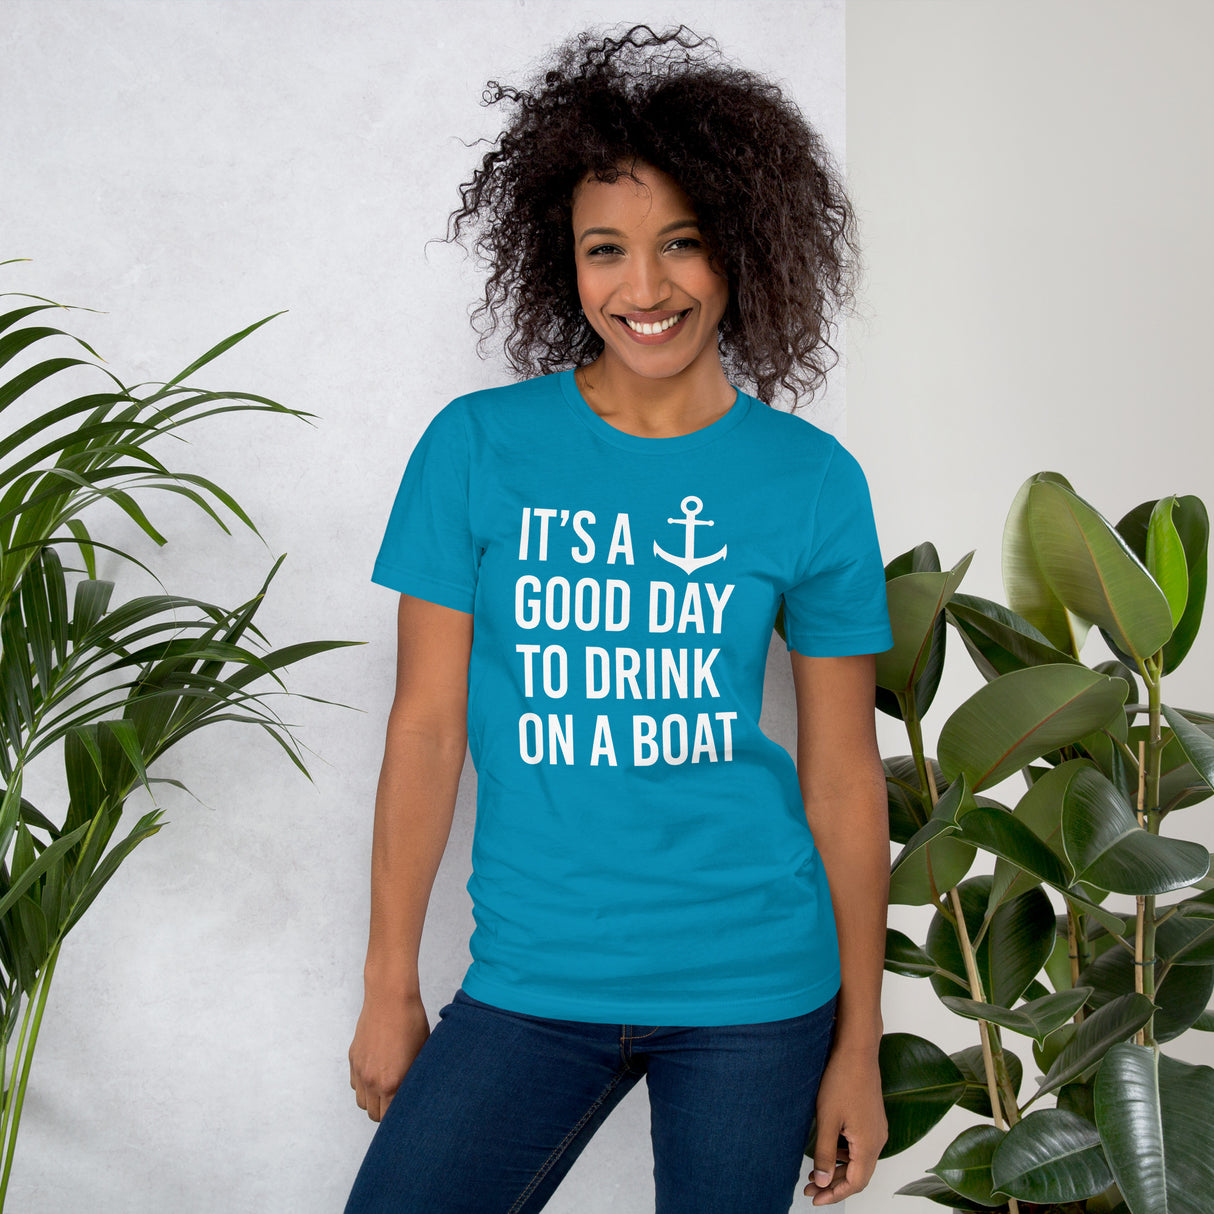 It's a Good Day to Drink on a Boat Women's Shirt